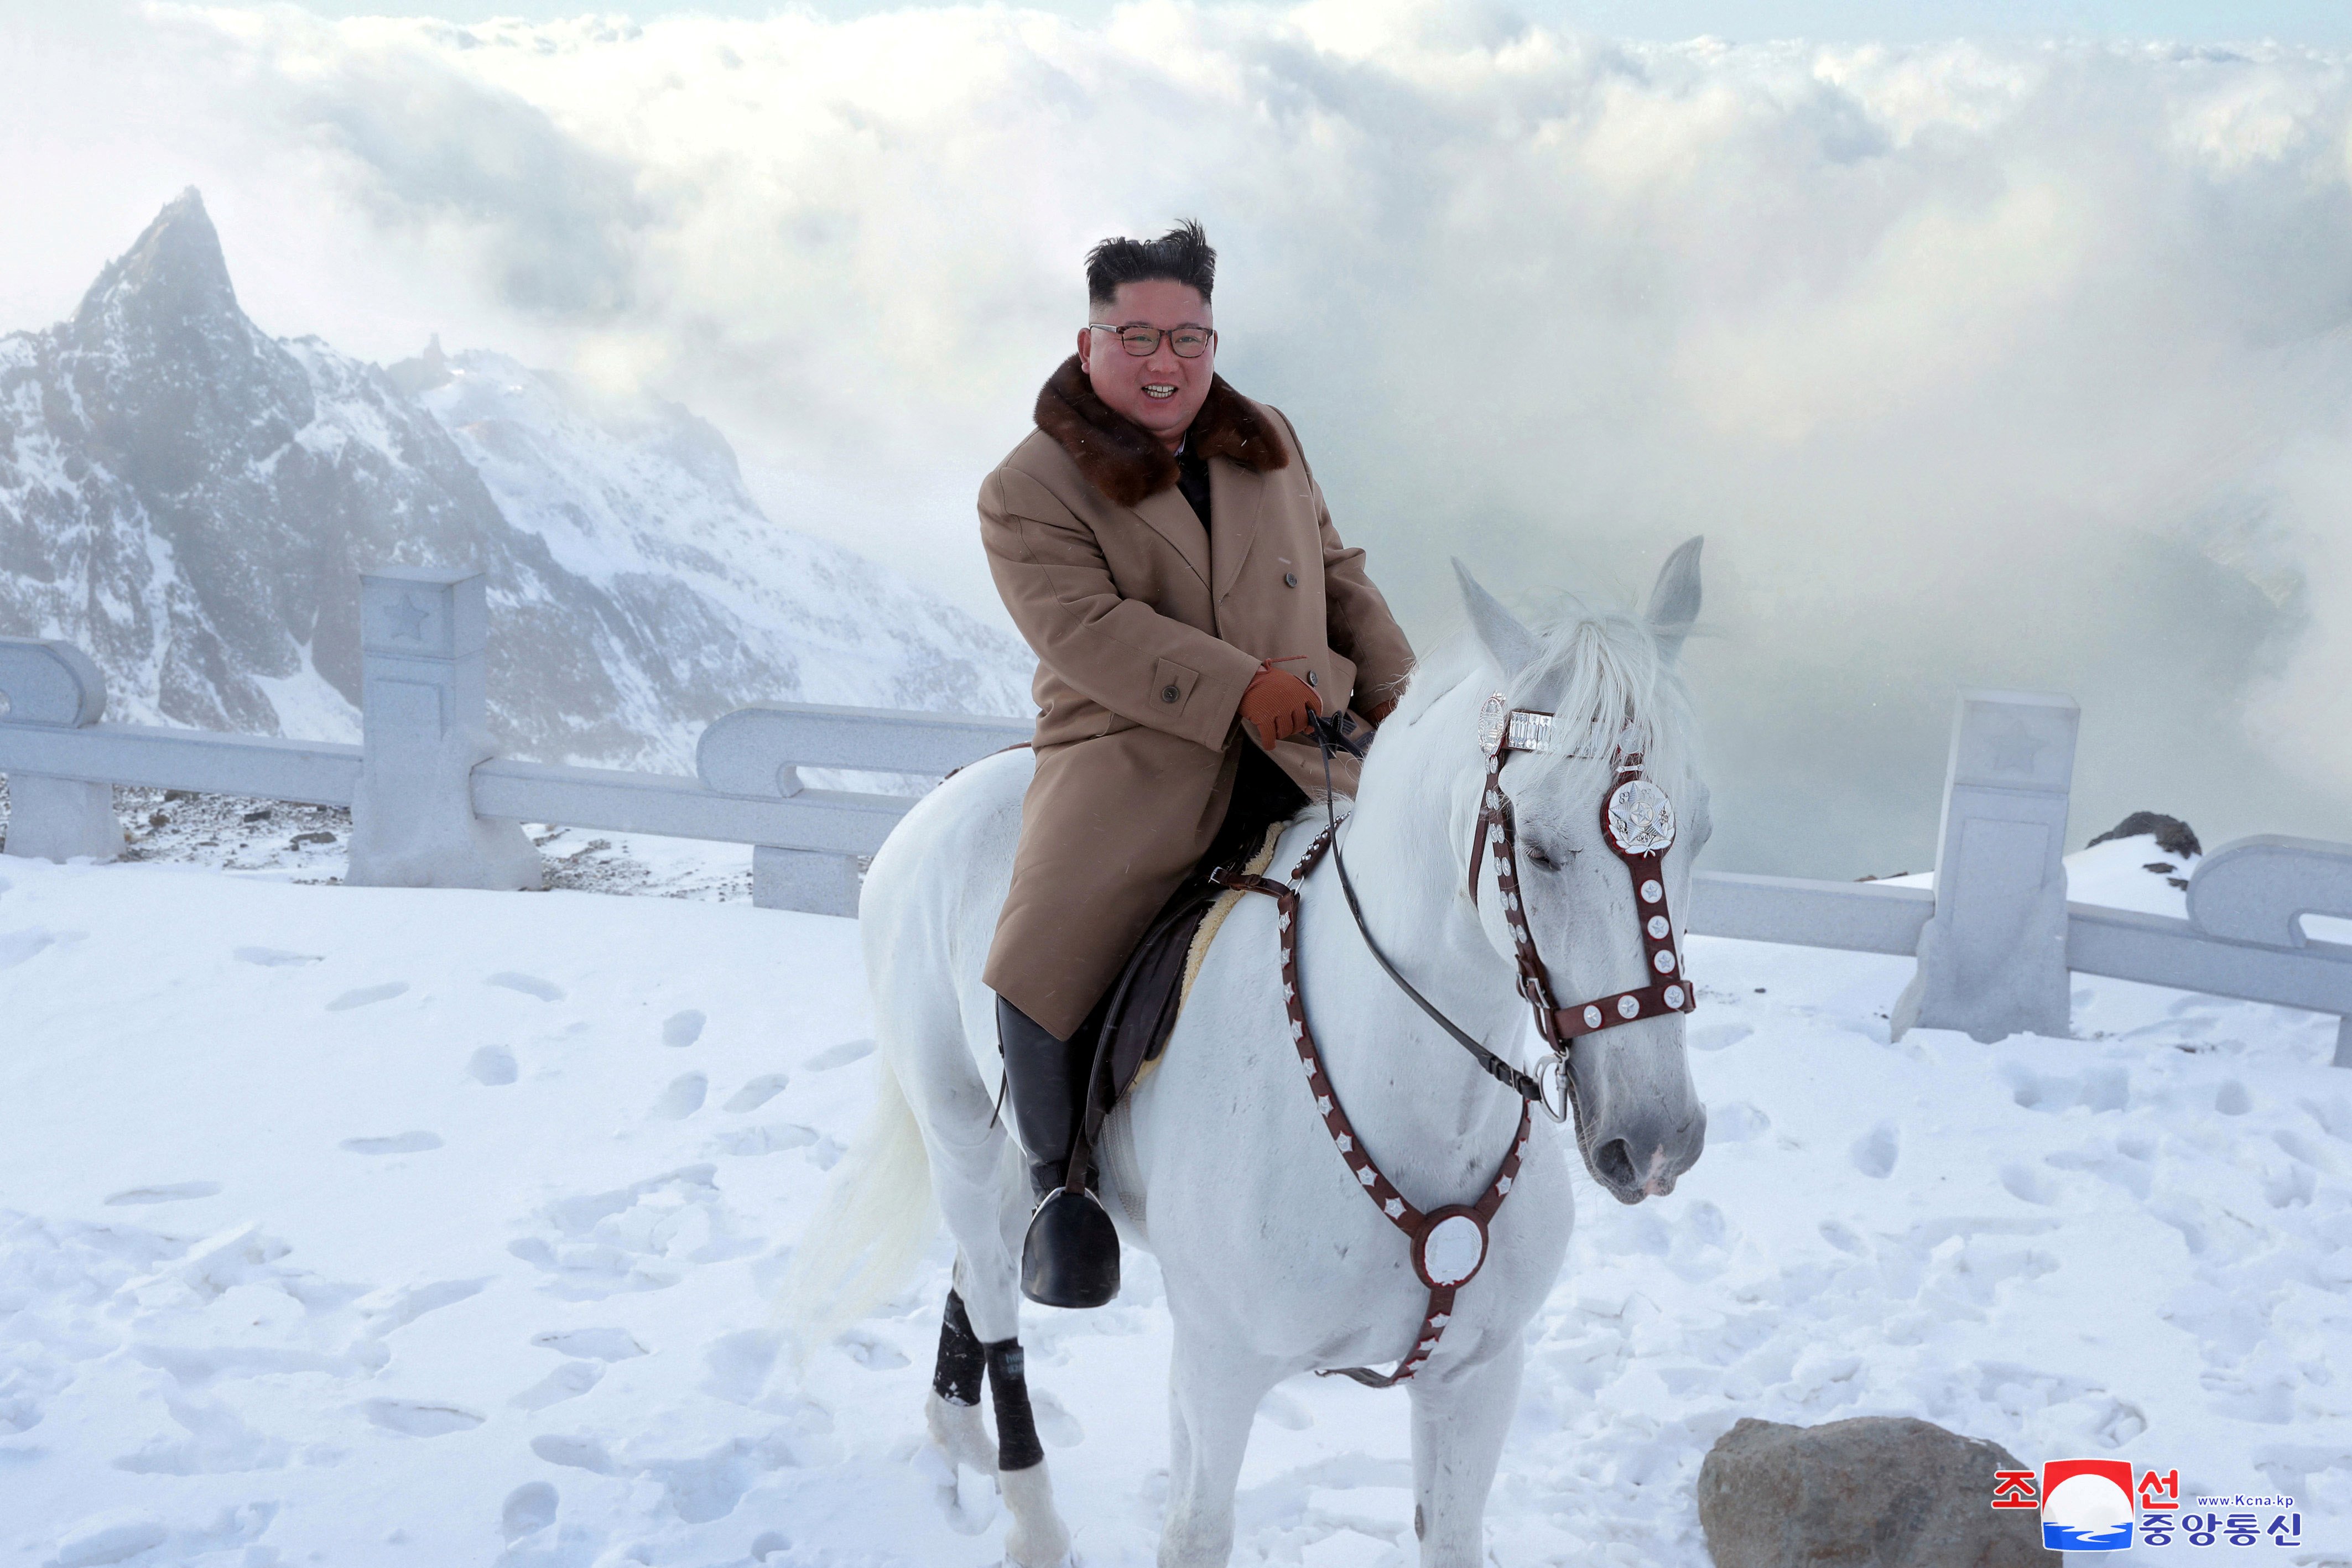 North Korean leader Kim Jong Un rides a horse during snowfall in Mount Paektu in this image released by North Korea's Korean Central News Agency (KCNA) on October 16, 2019. KCNA via REUTERS ATTENTION EDITORS - THIS IMAGE WAS PROVIDED BY A THIRD PARTY. REUTERS IS UNABLE TO INDEPENDENTLY VERIFY THIS IMAGE. NO THIRD PARTY SALES. SOUTH KOREA OUT.